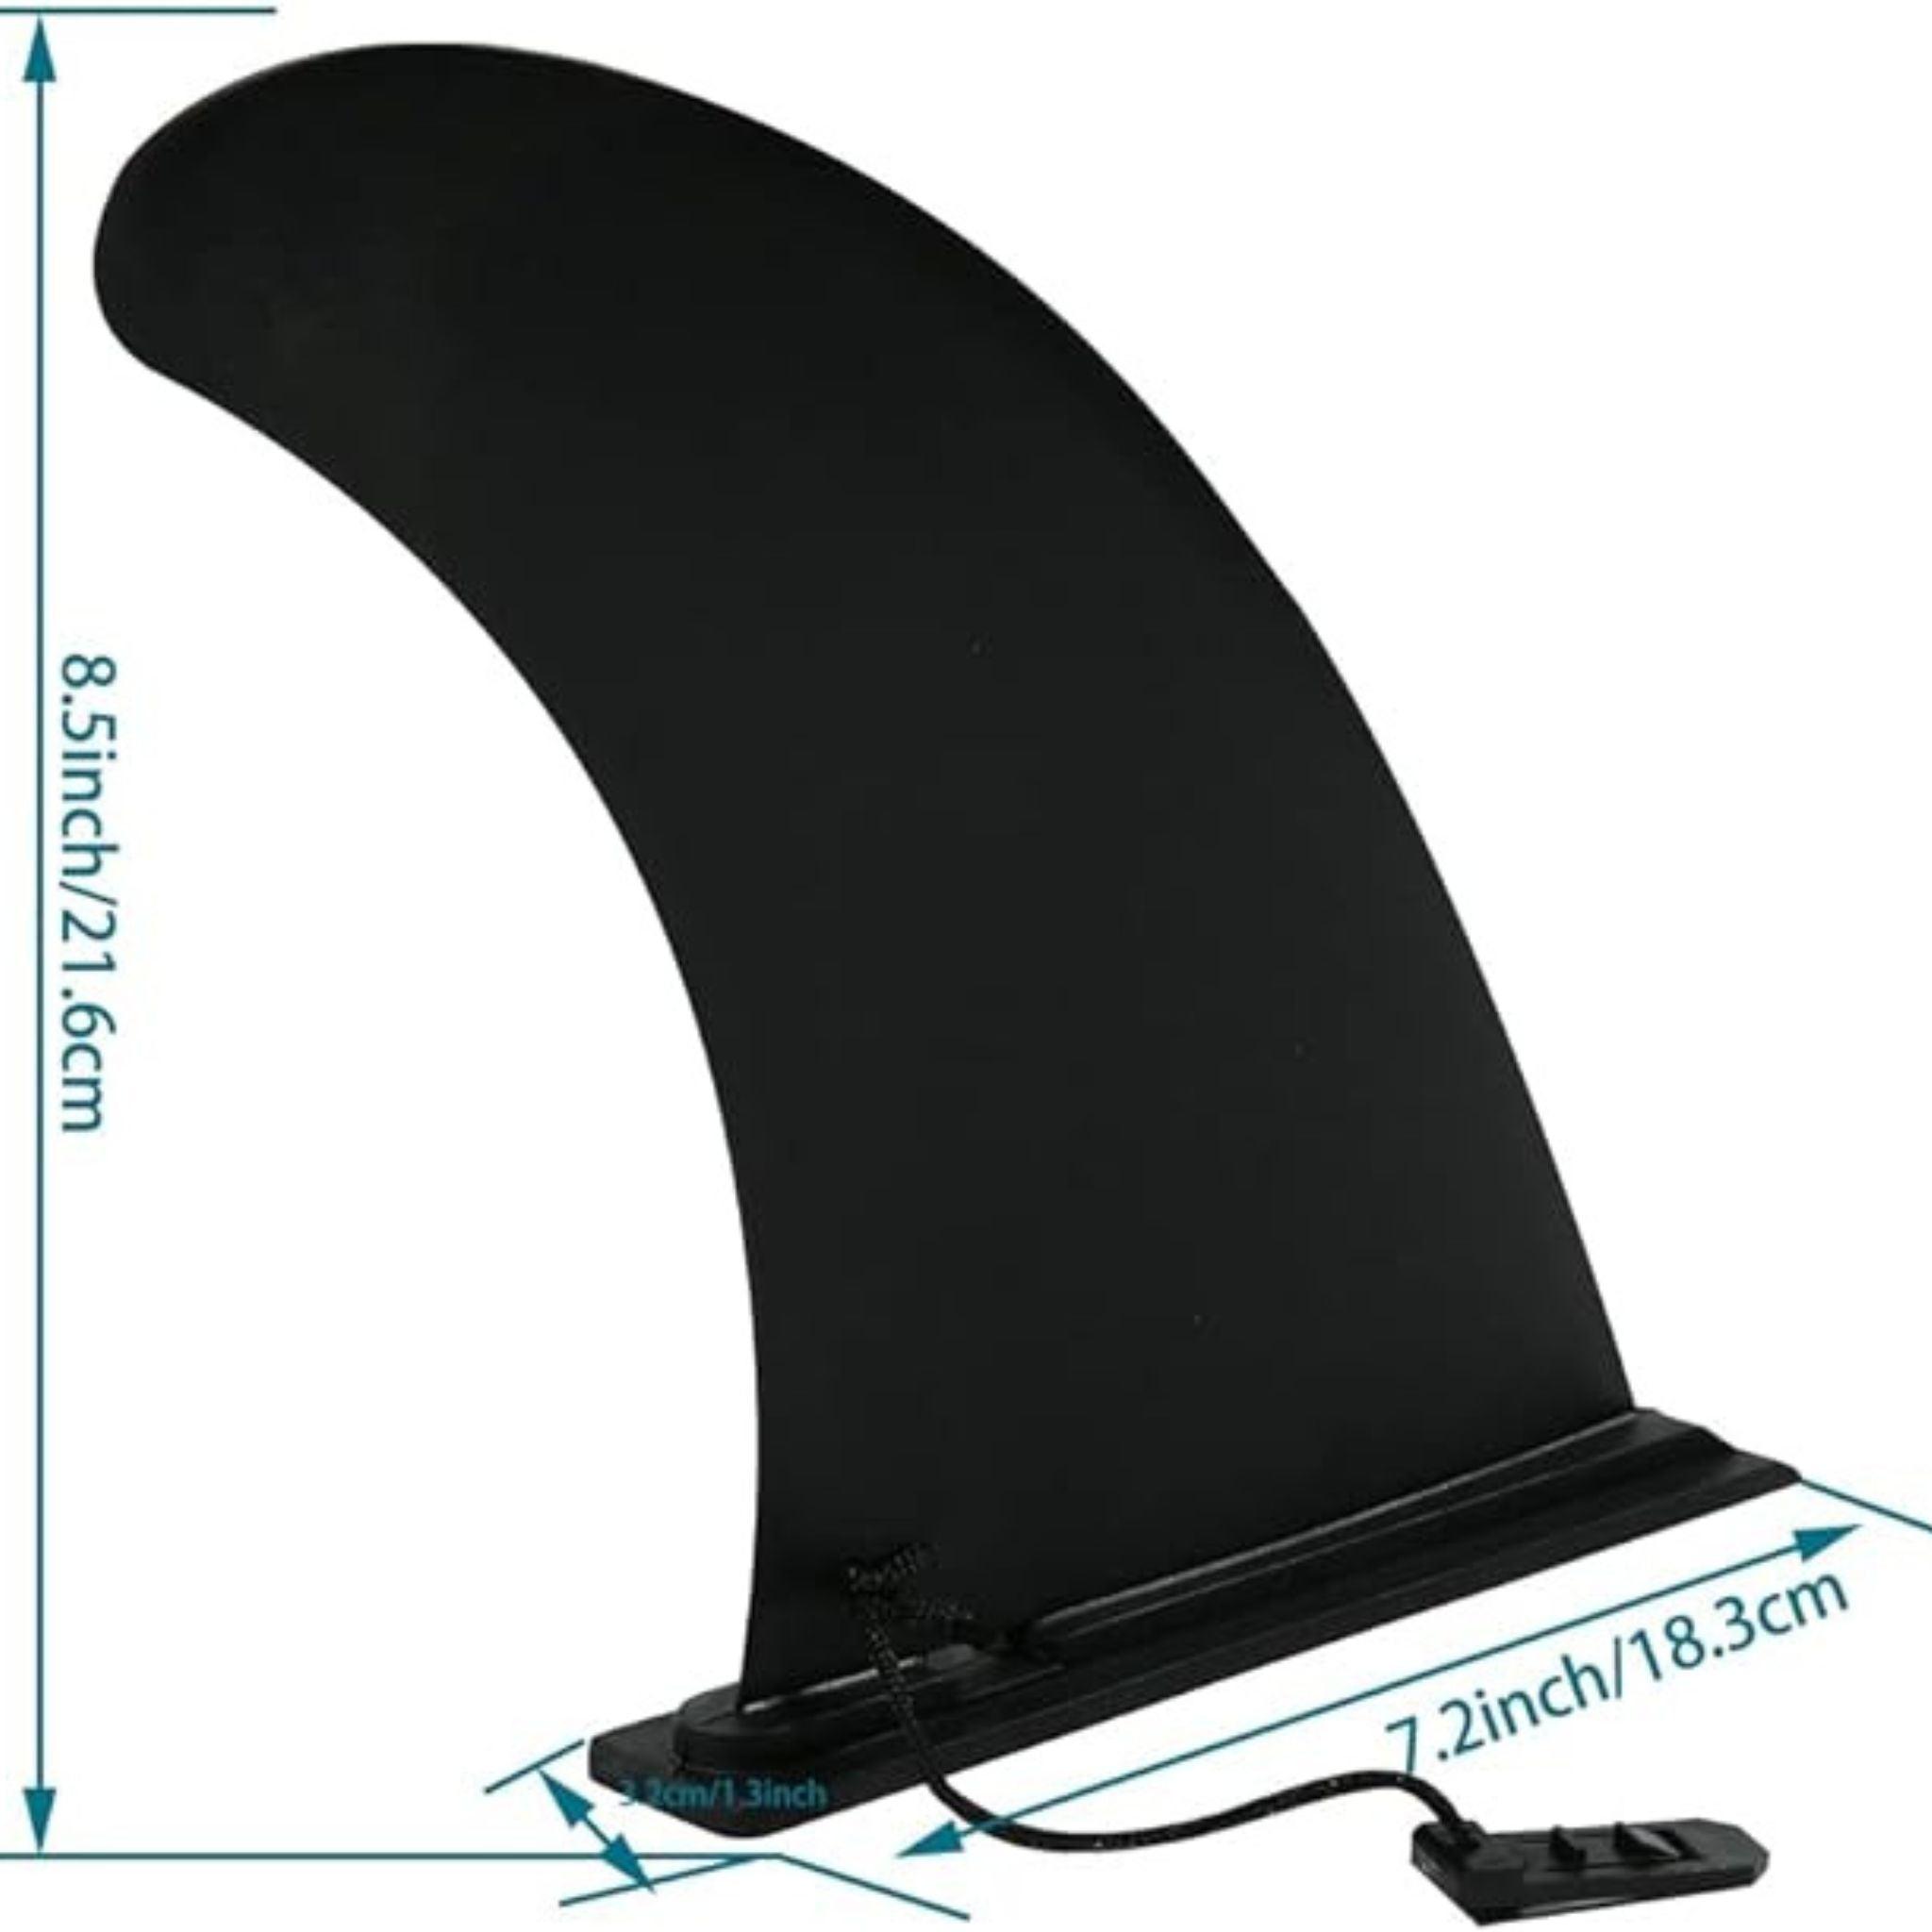 Replacement Fin - Slide In Fin - Newell Outdoors